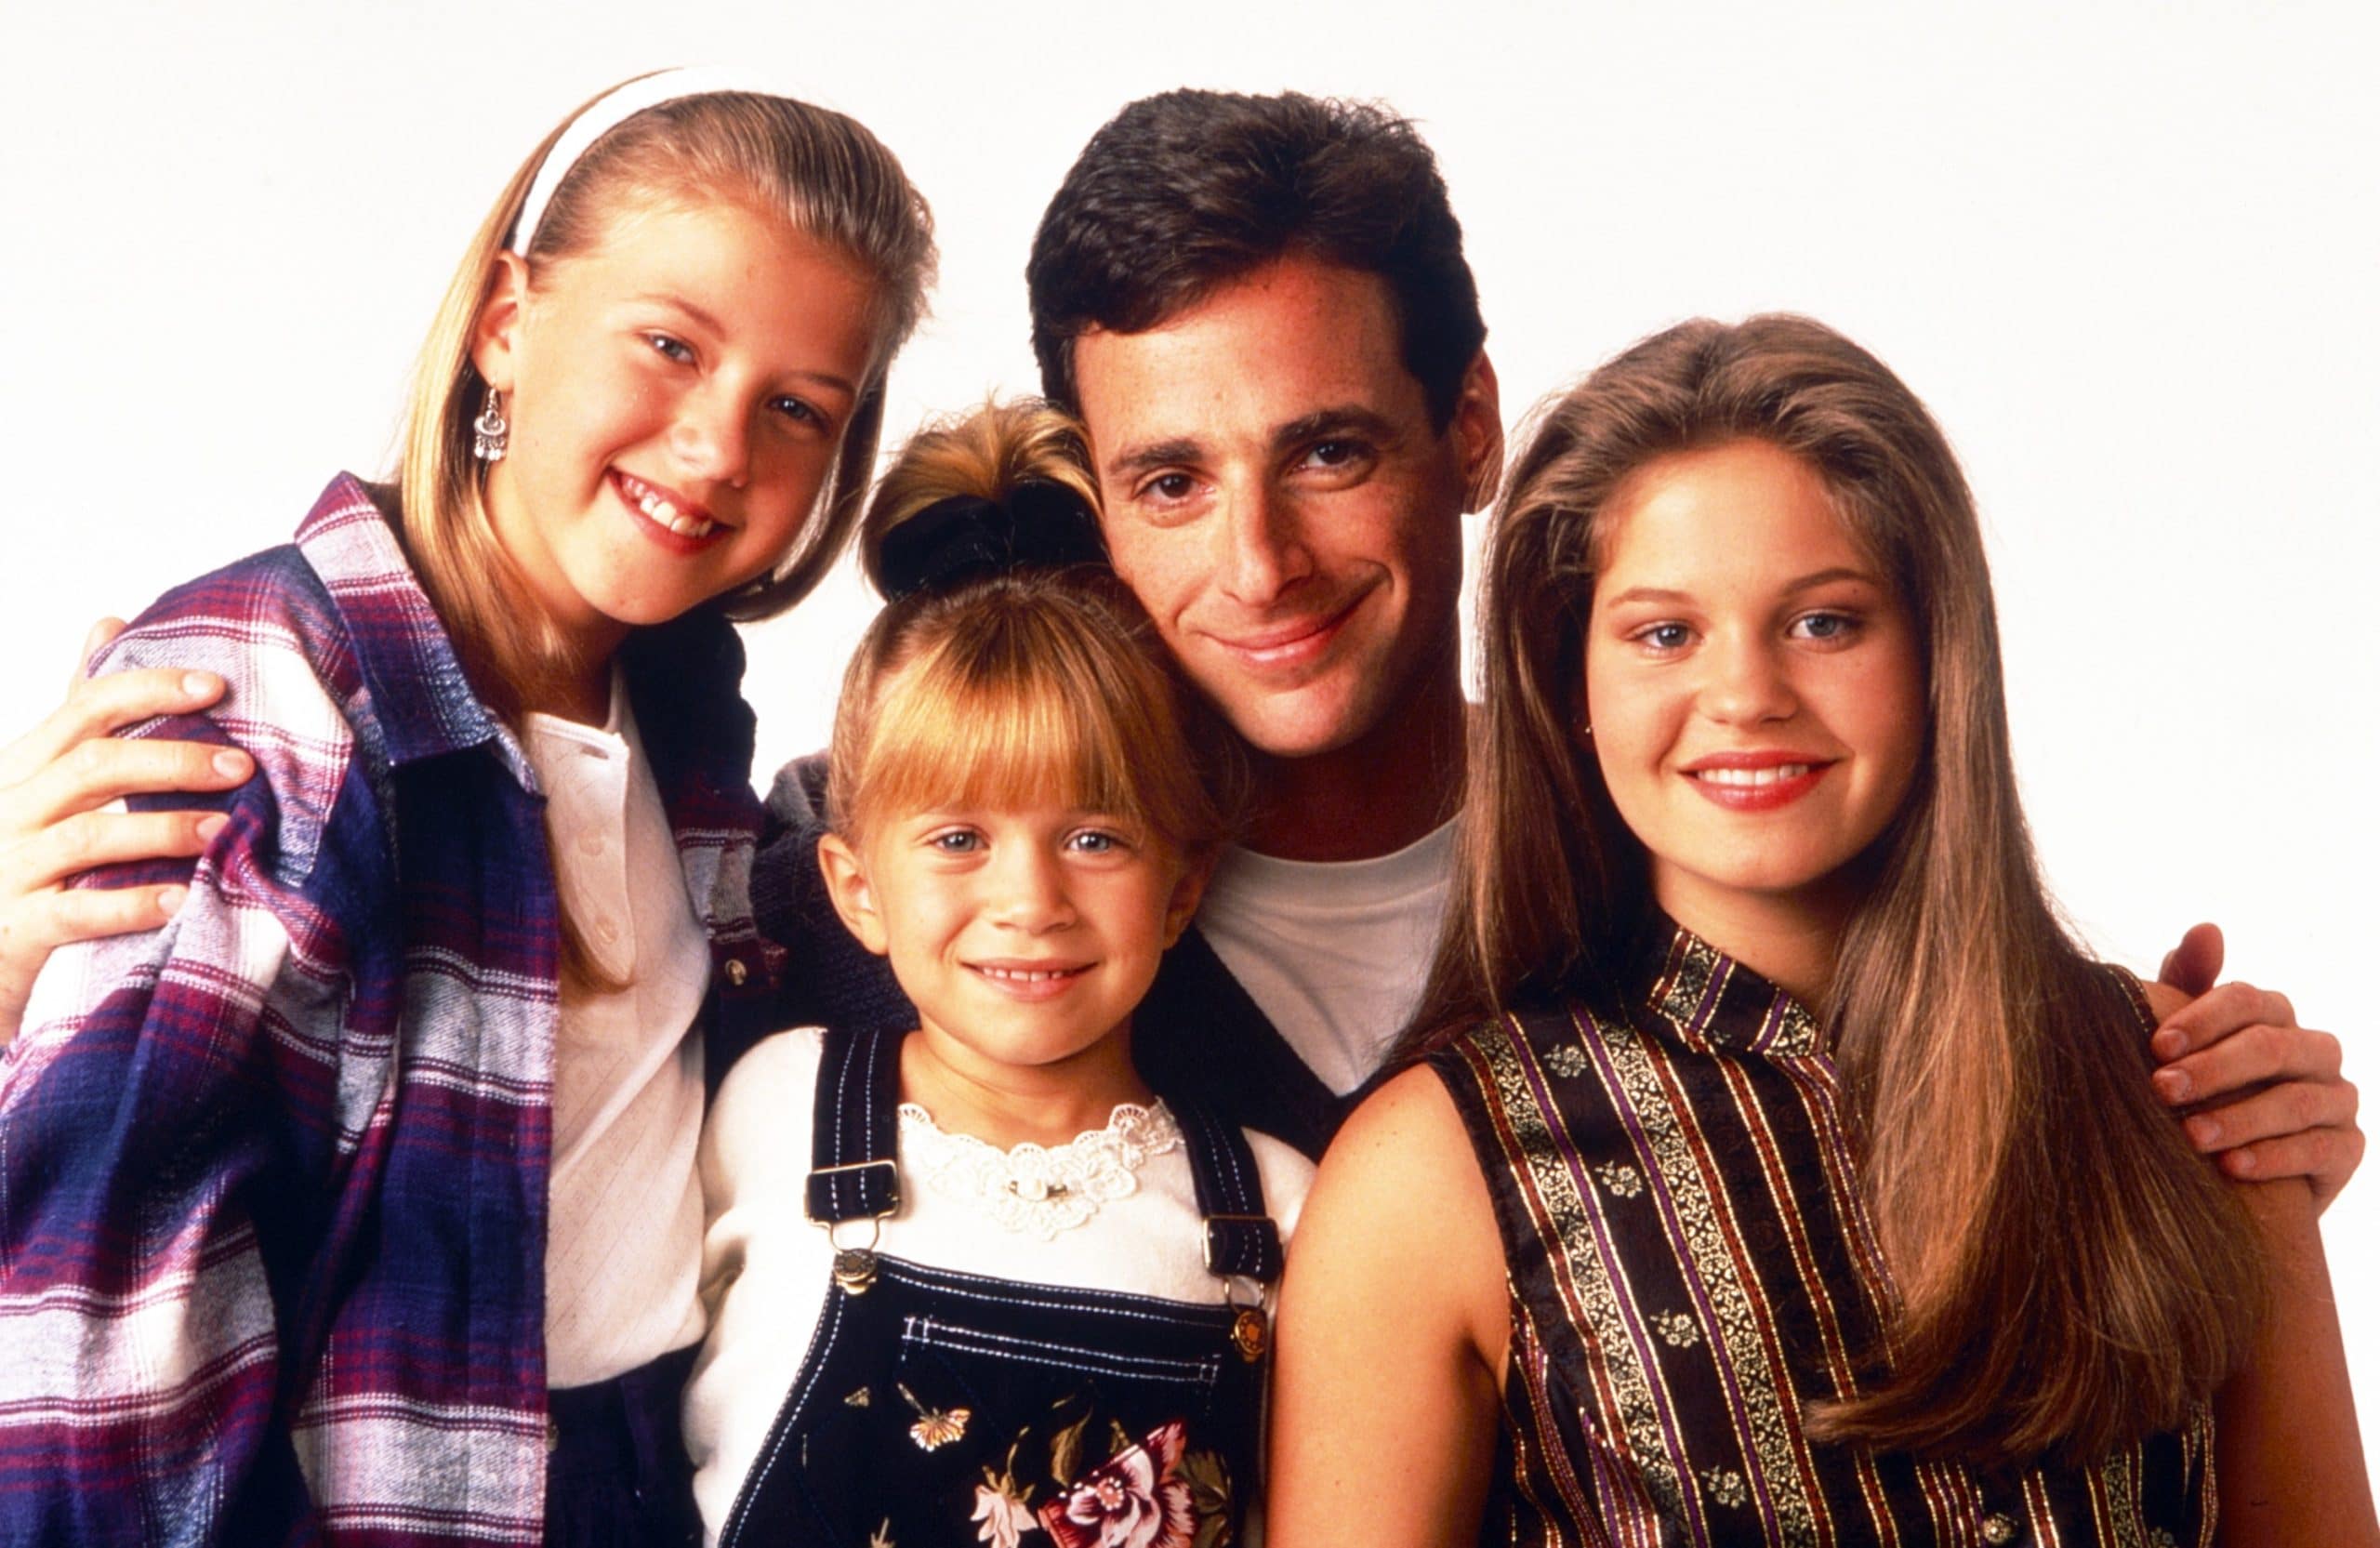 FULL HOUSE, from left: Jodie Sweetin, Mary-Kate Olsen, Bob Saget, Candace Cameron Bure, 1993, 1987-1995